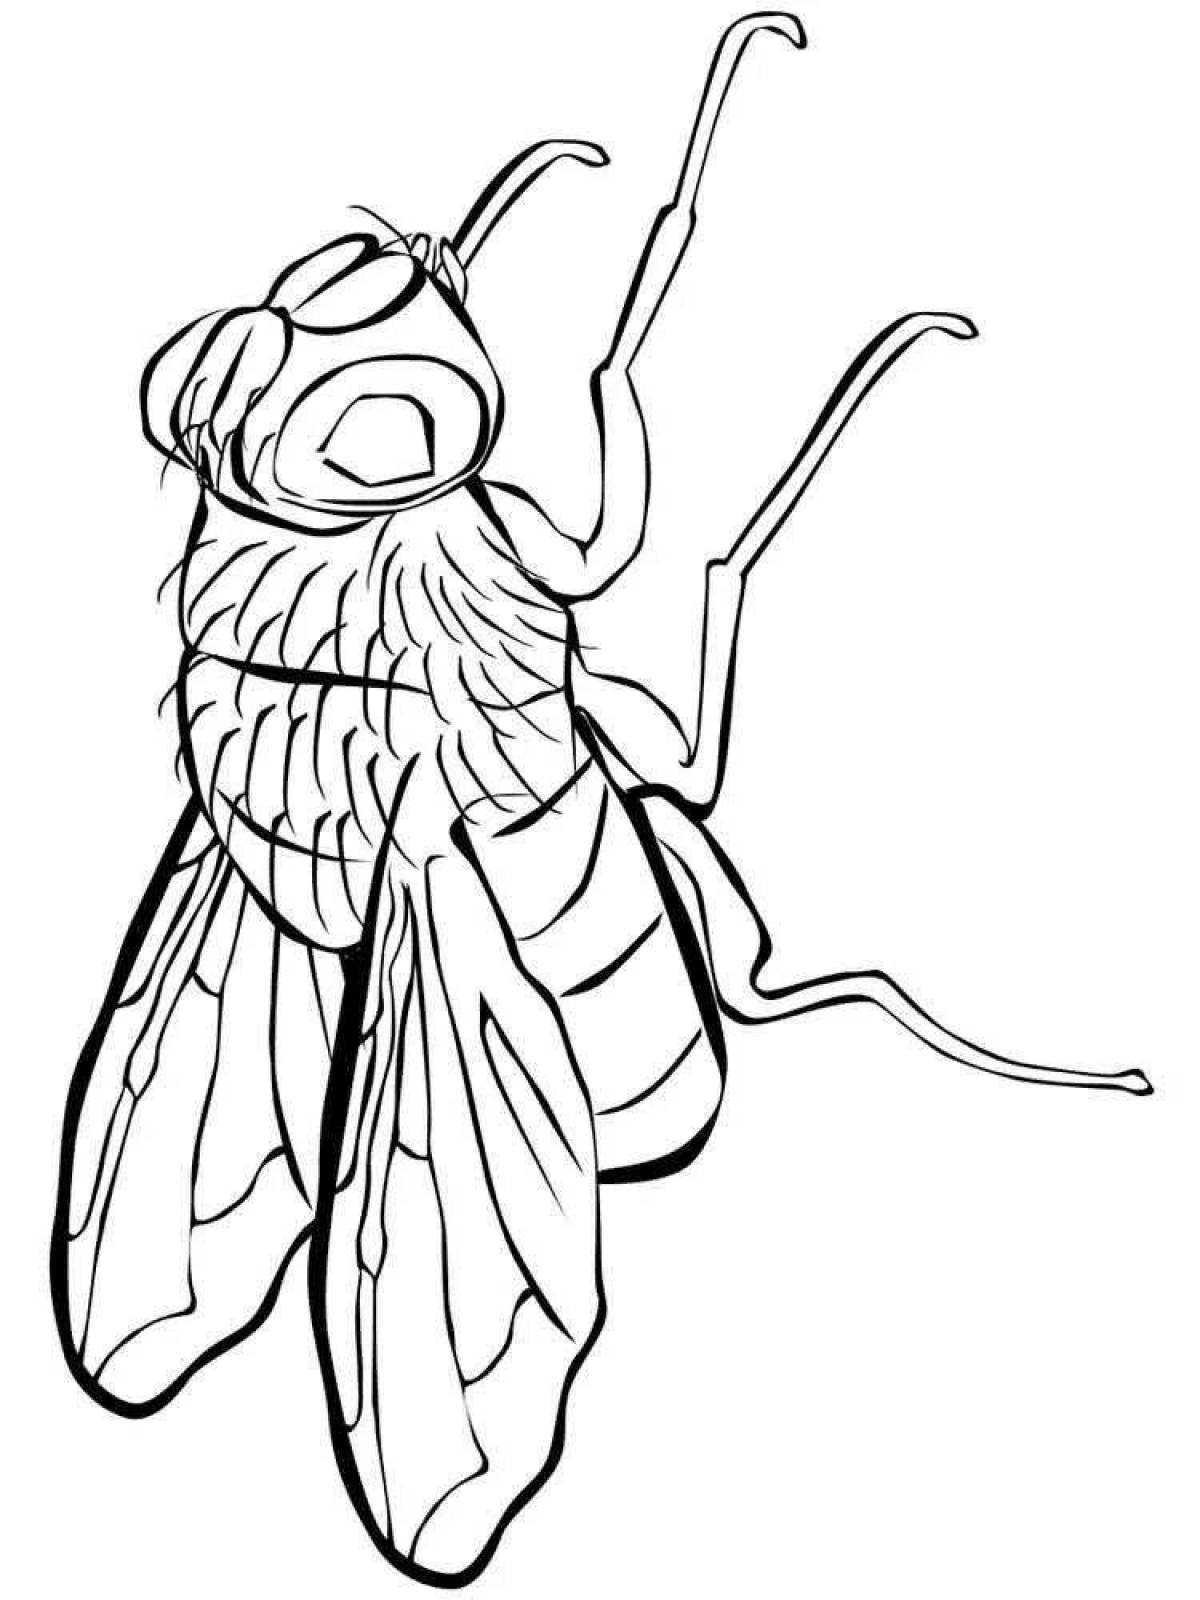 Glowing Fly Coloring Page for Kids